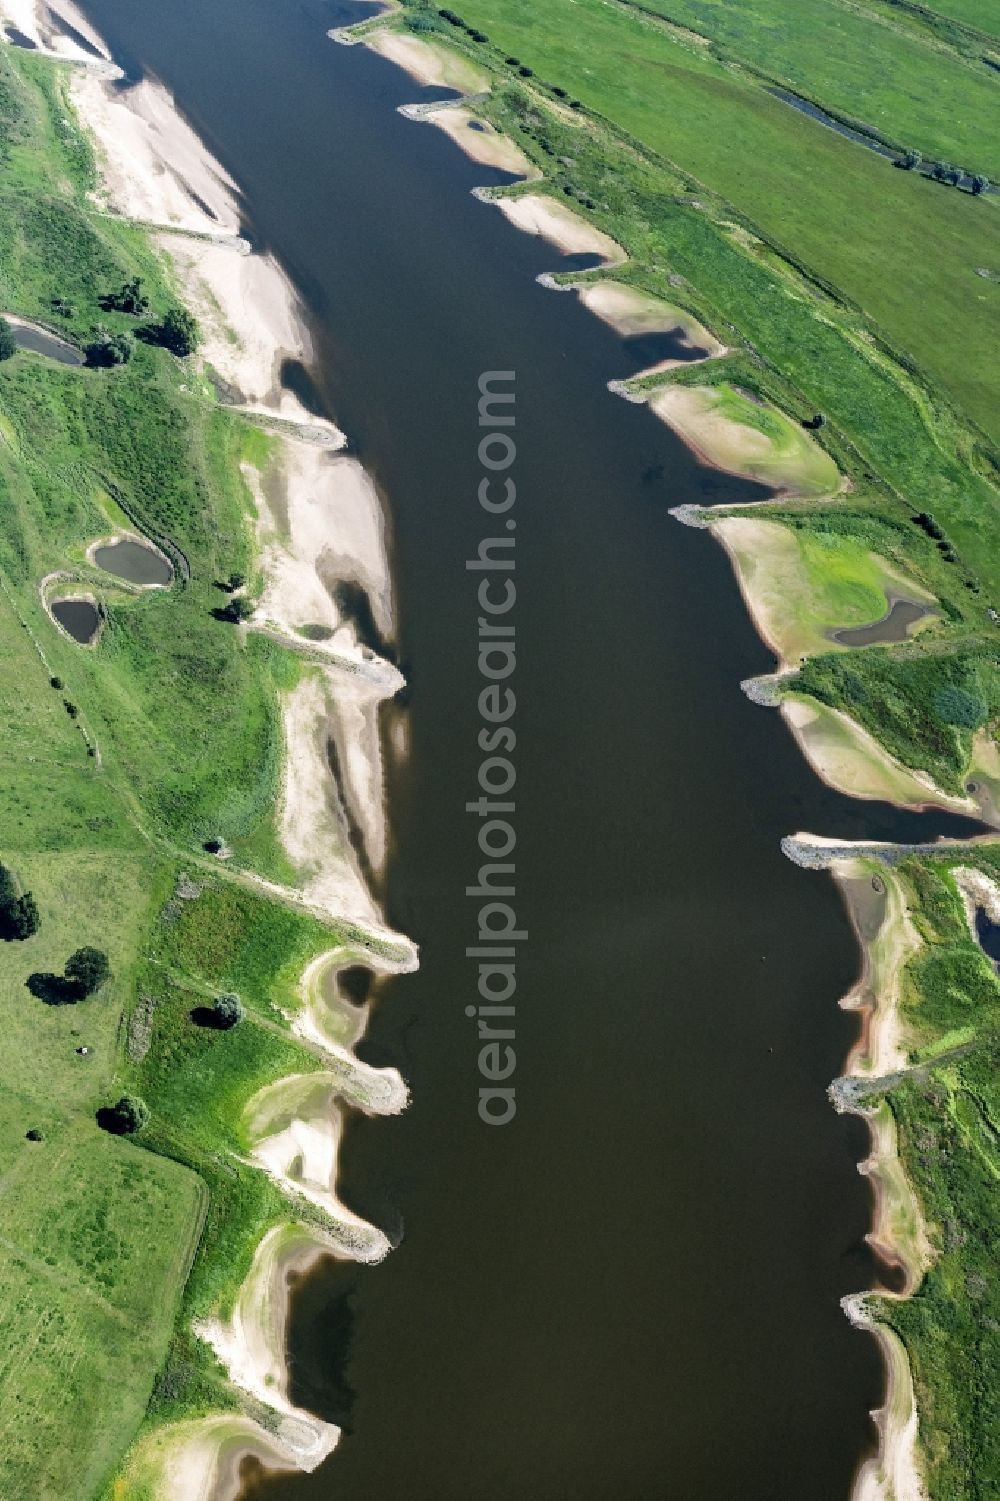 Schönberg from the bird's eye view: Groyne head of the of the River Elbe river course in Schoenberg in the state Saxony-Anhalt, Germany